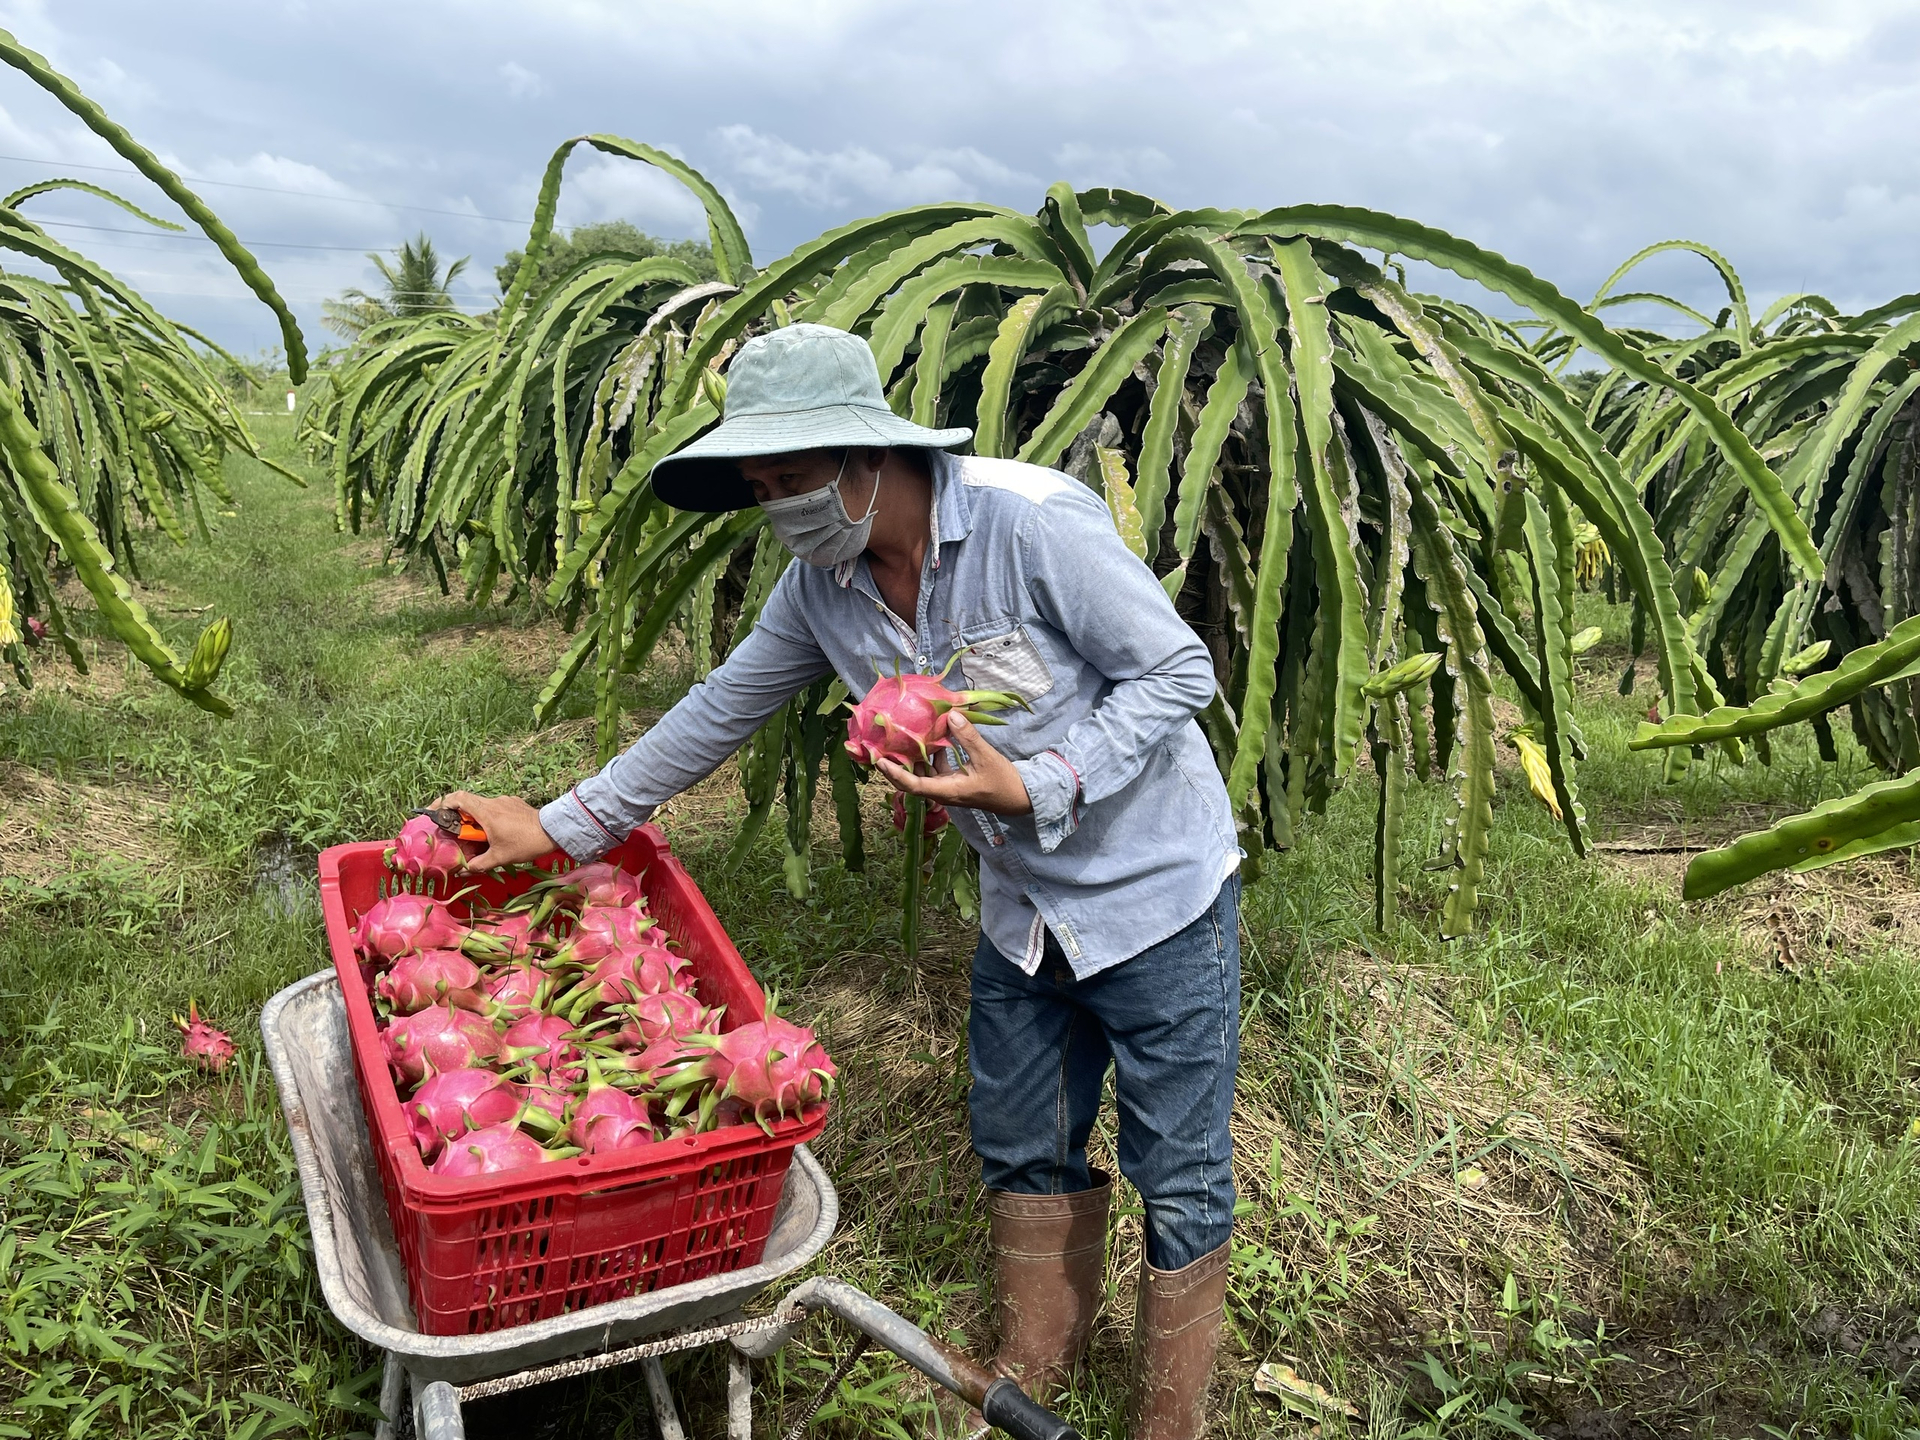 Due to the unstable market demand, local residents in Binh Thuan province are hesitant to invest in dragon fruit cultivation. Photo: M.P.